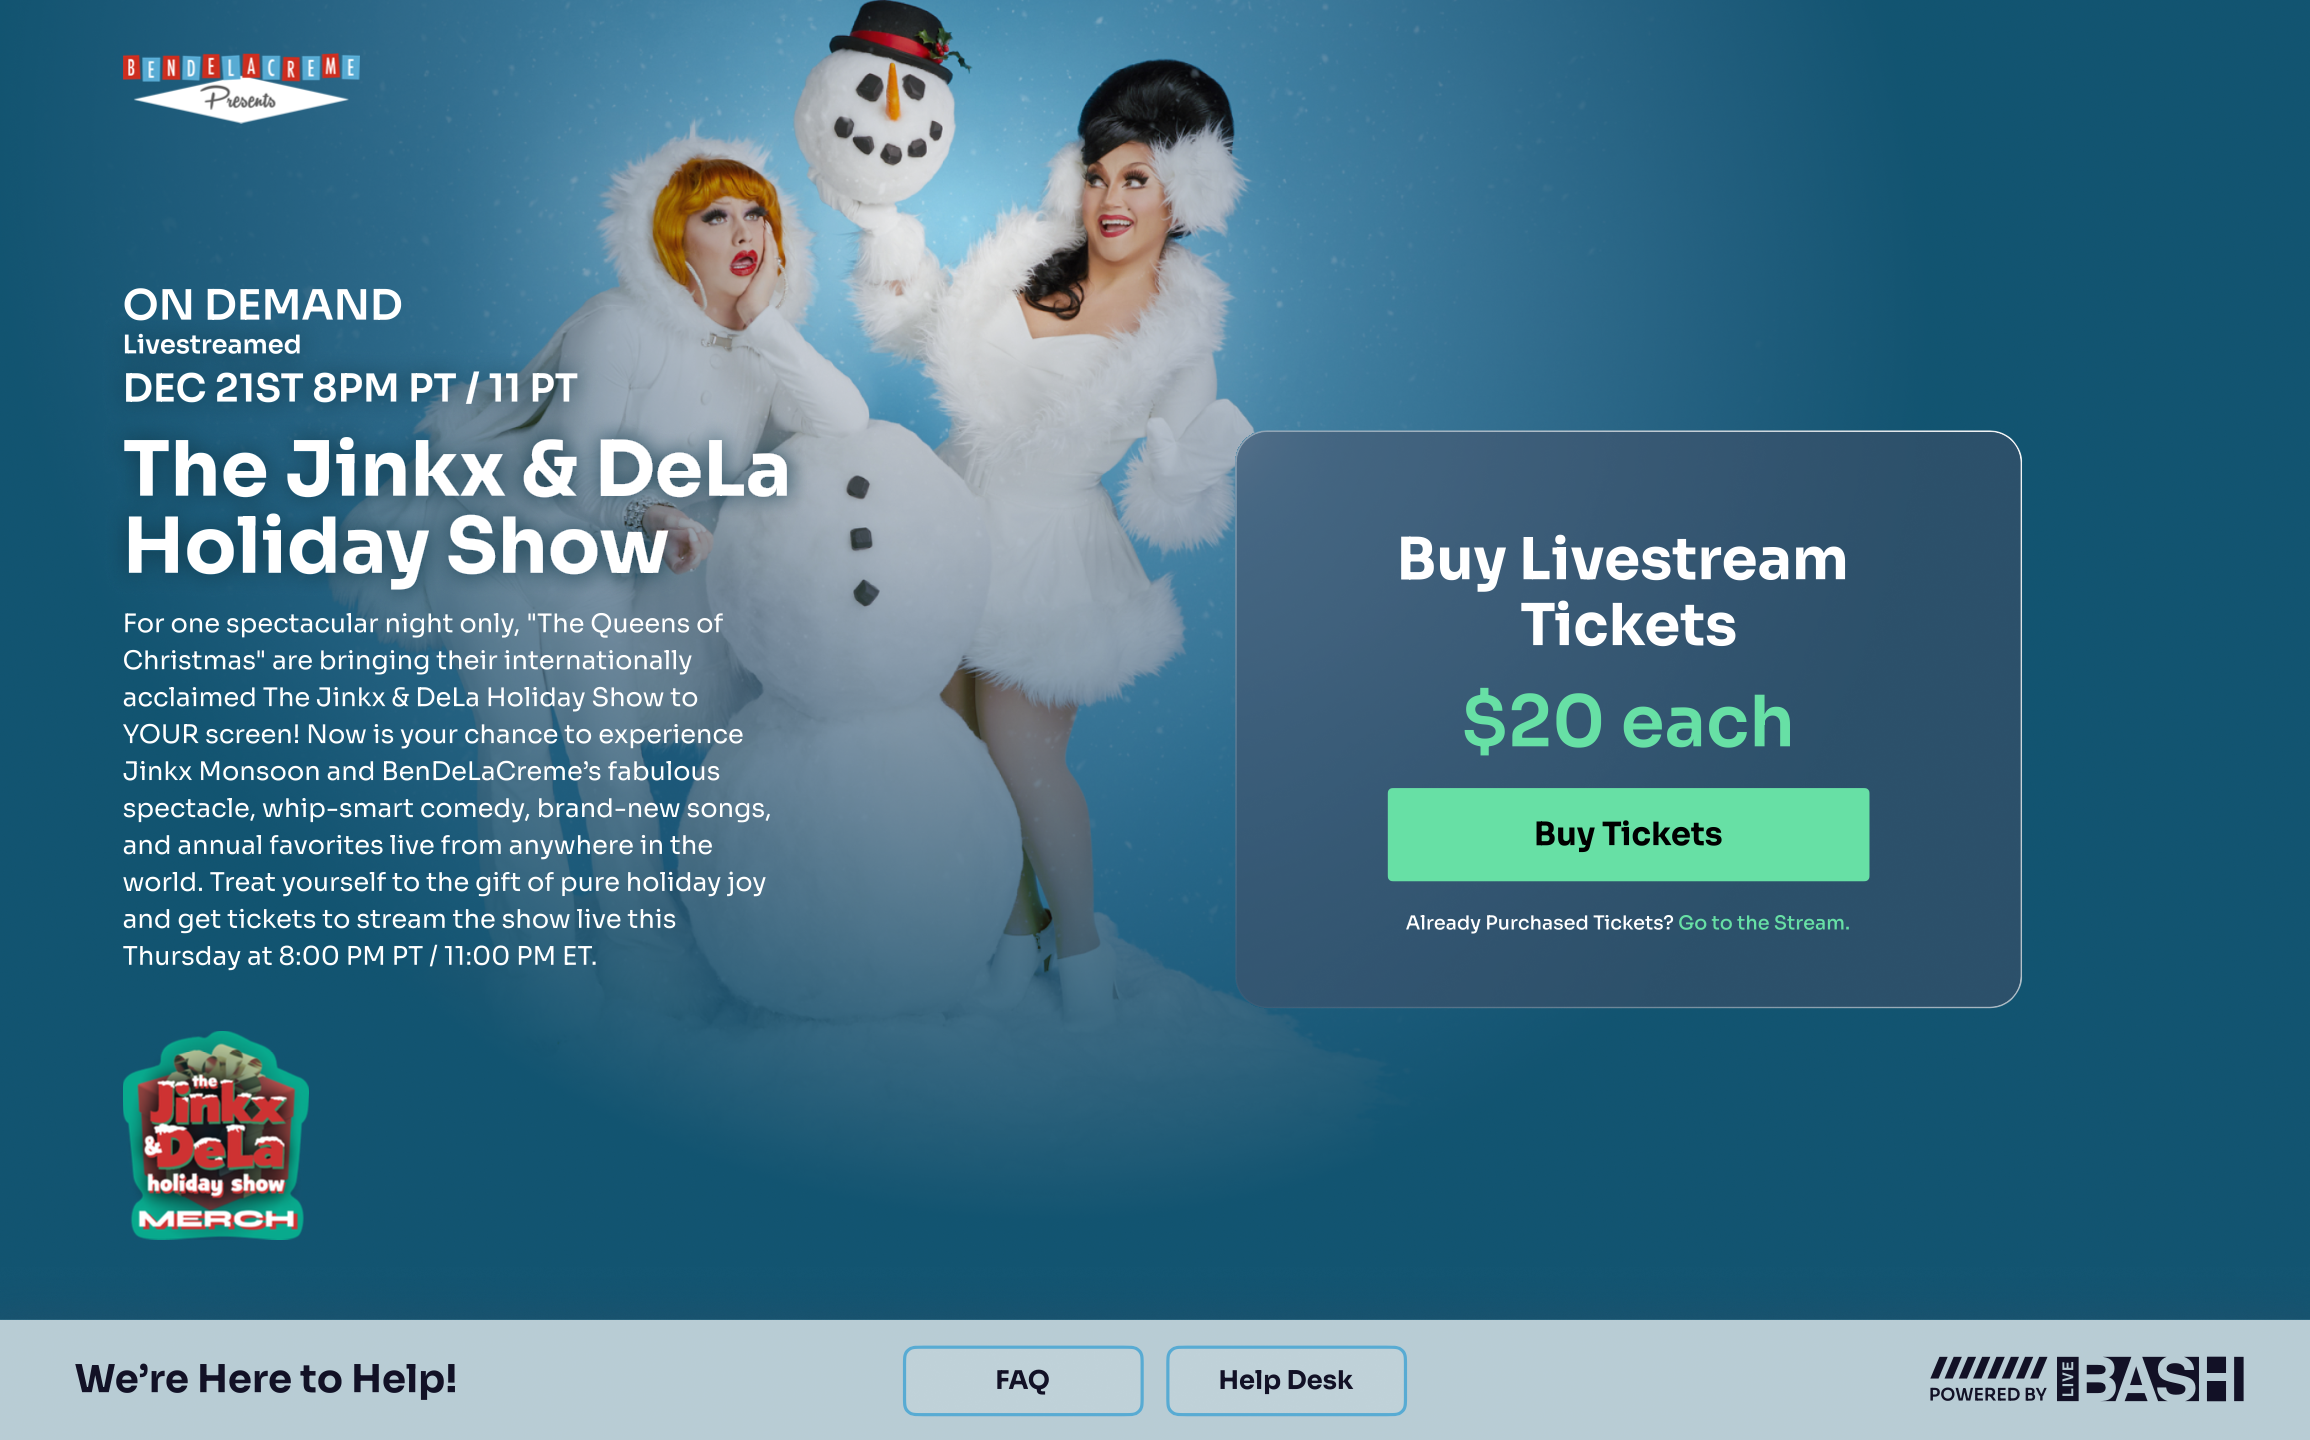 digital venue ticketing page for The Jinkx & DeLa Holiday Show